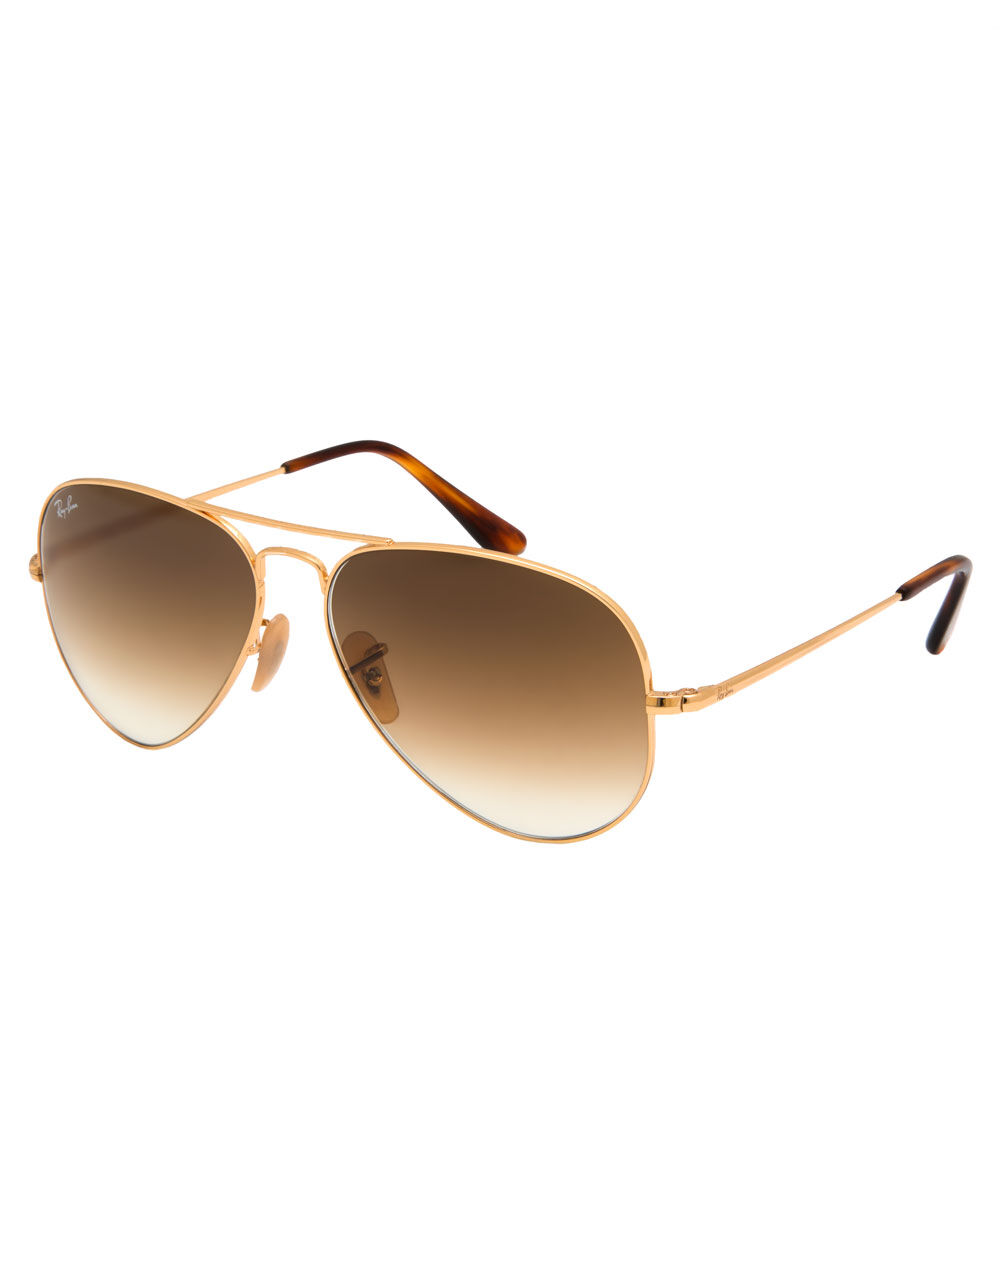 RAY-BAN RB3689 Aviator Gold & Light Brown Gradient Sunglasses - GOLD ...